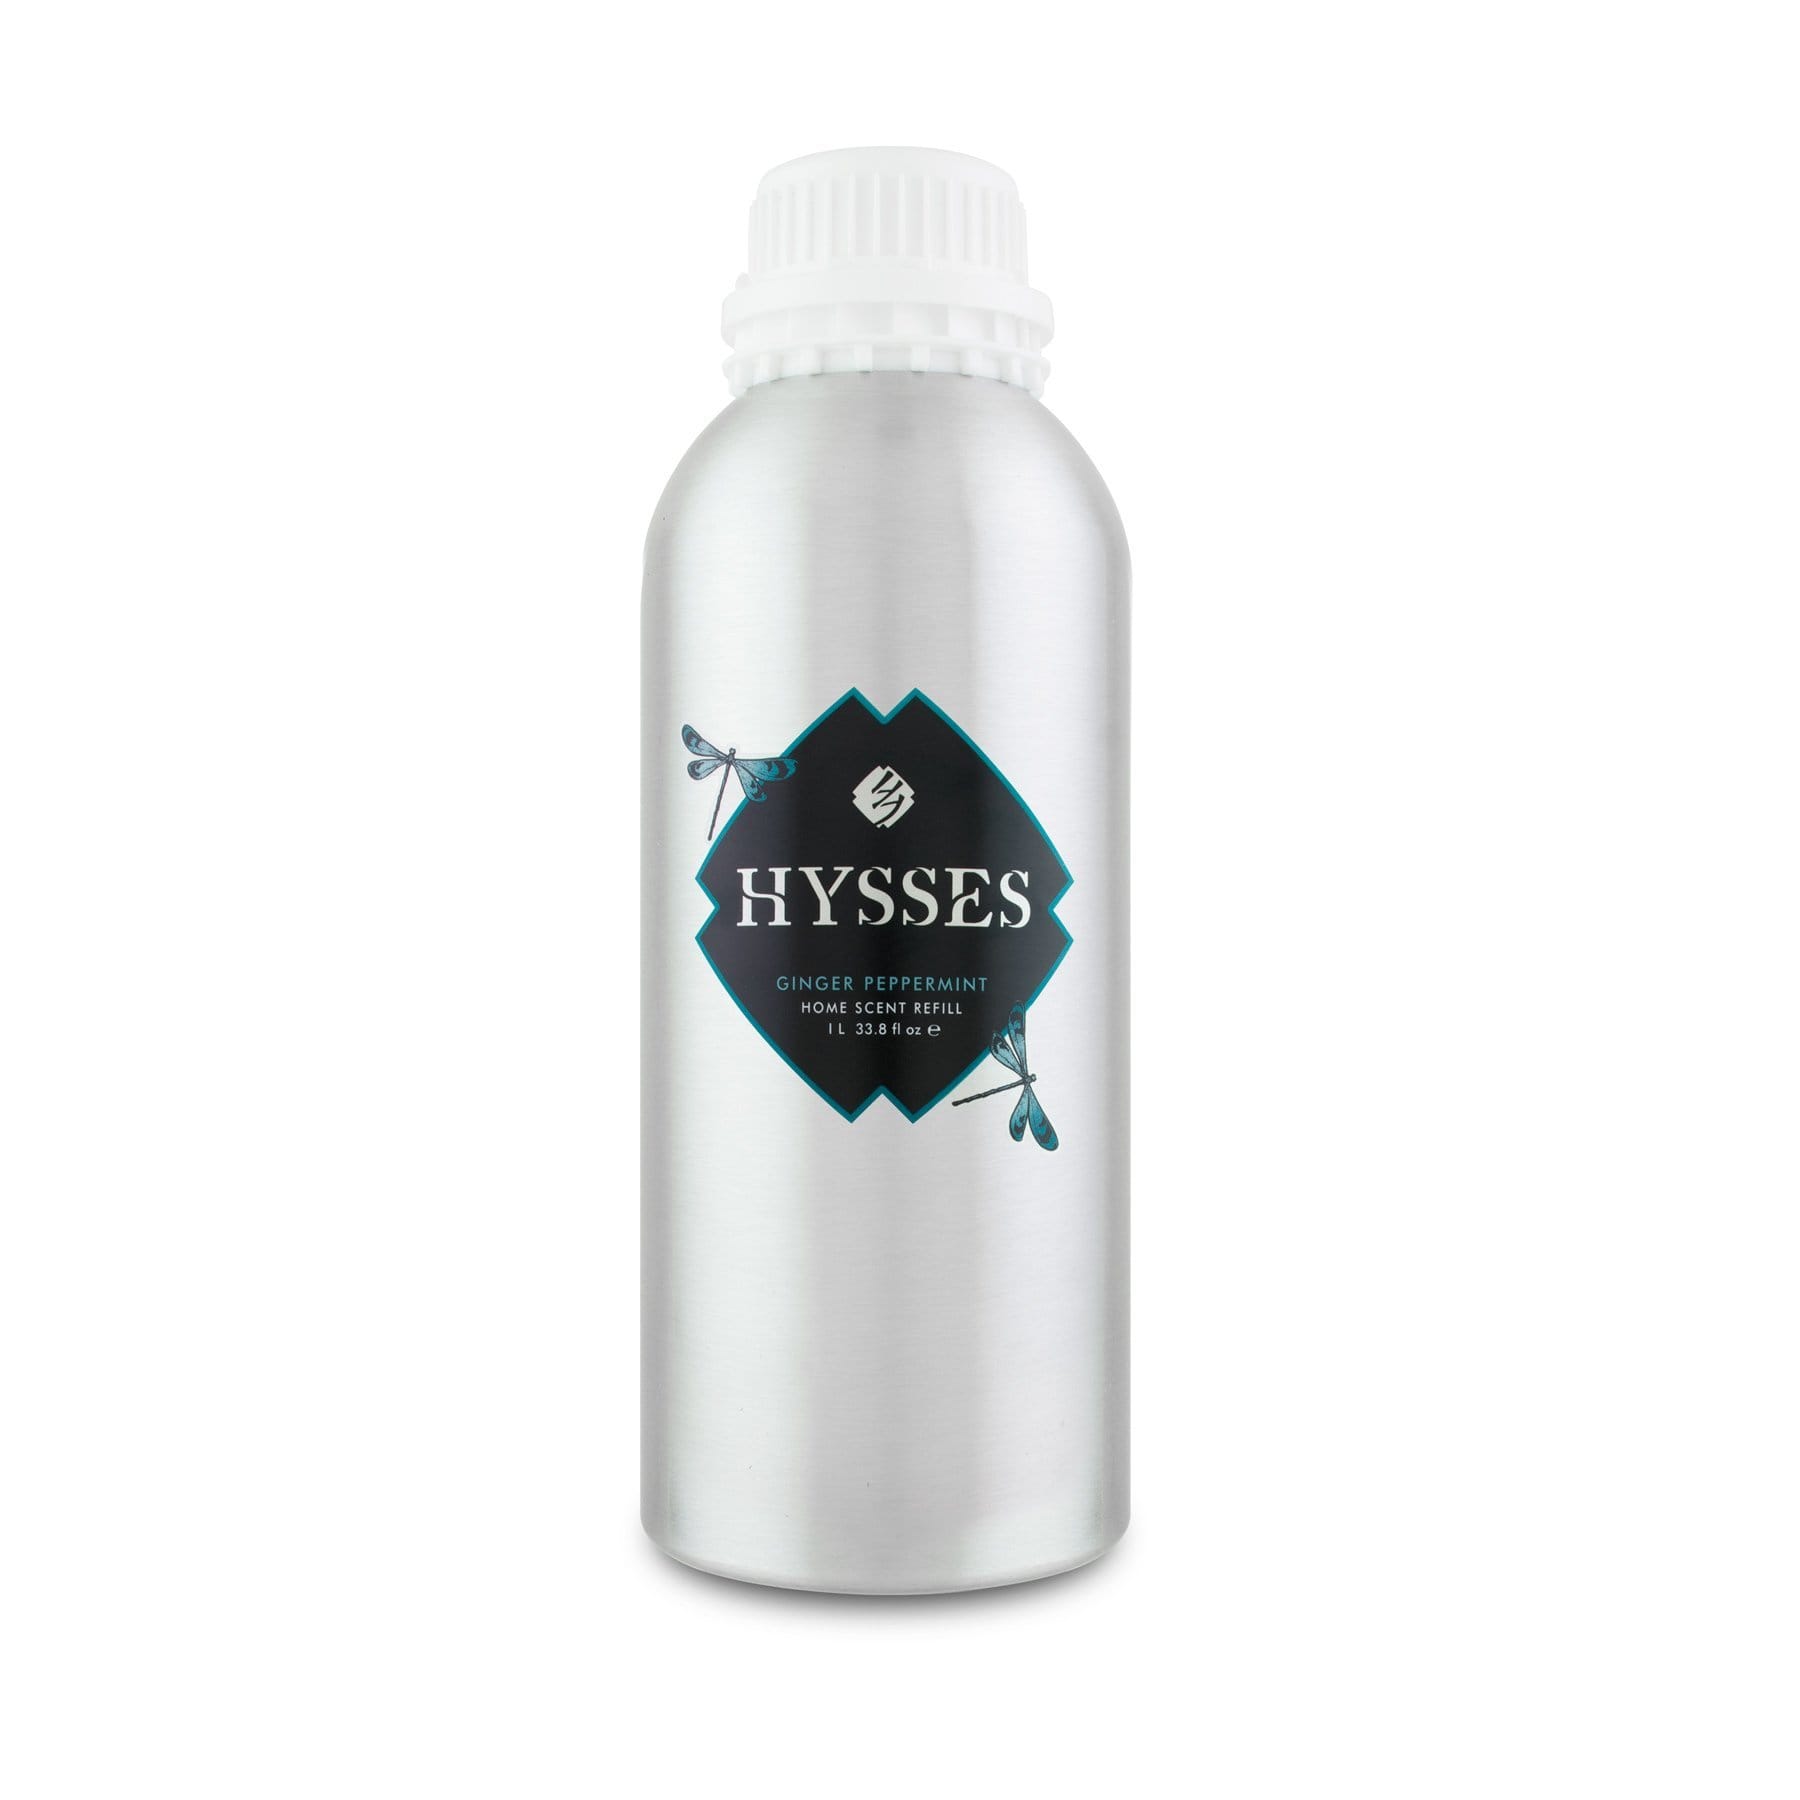 Hysses Home Scents 500ml Refill Home Scent  Ginger Peppermint, 500ml